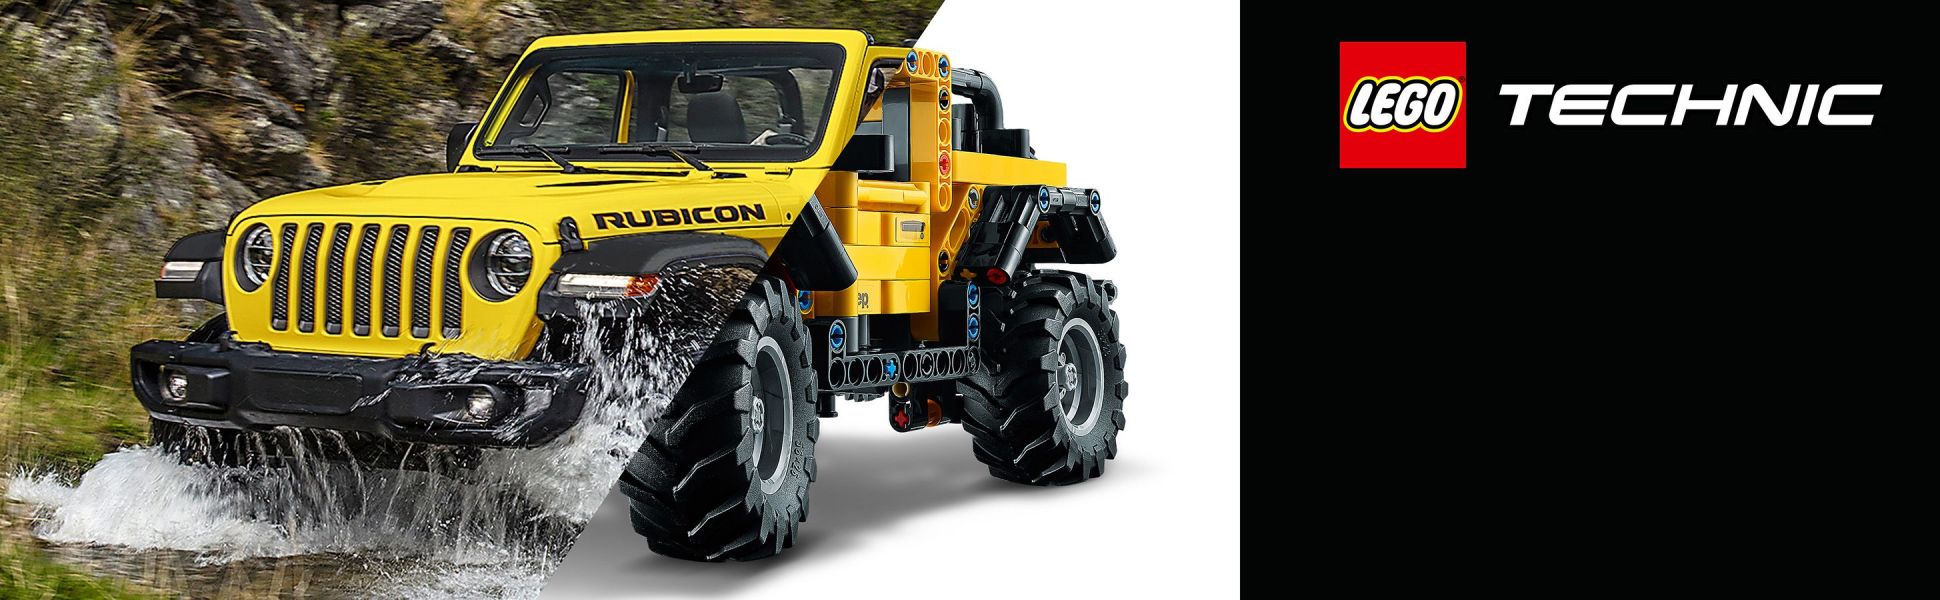 Lego debuts Jeep Wrangler Rubicon kit for off-roading around your home